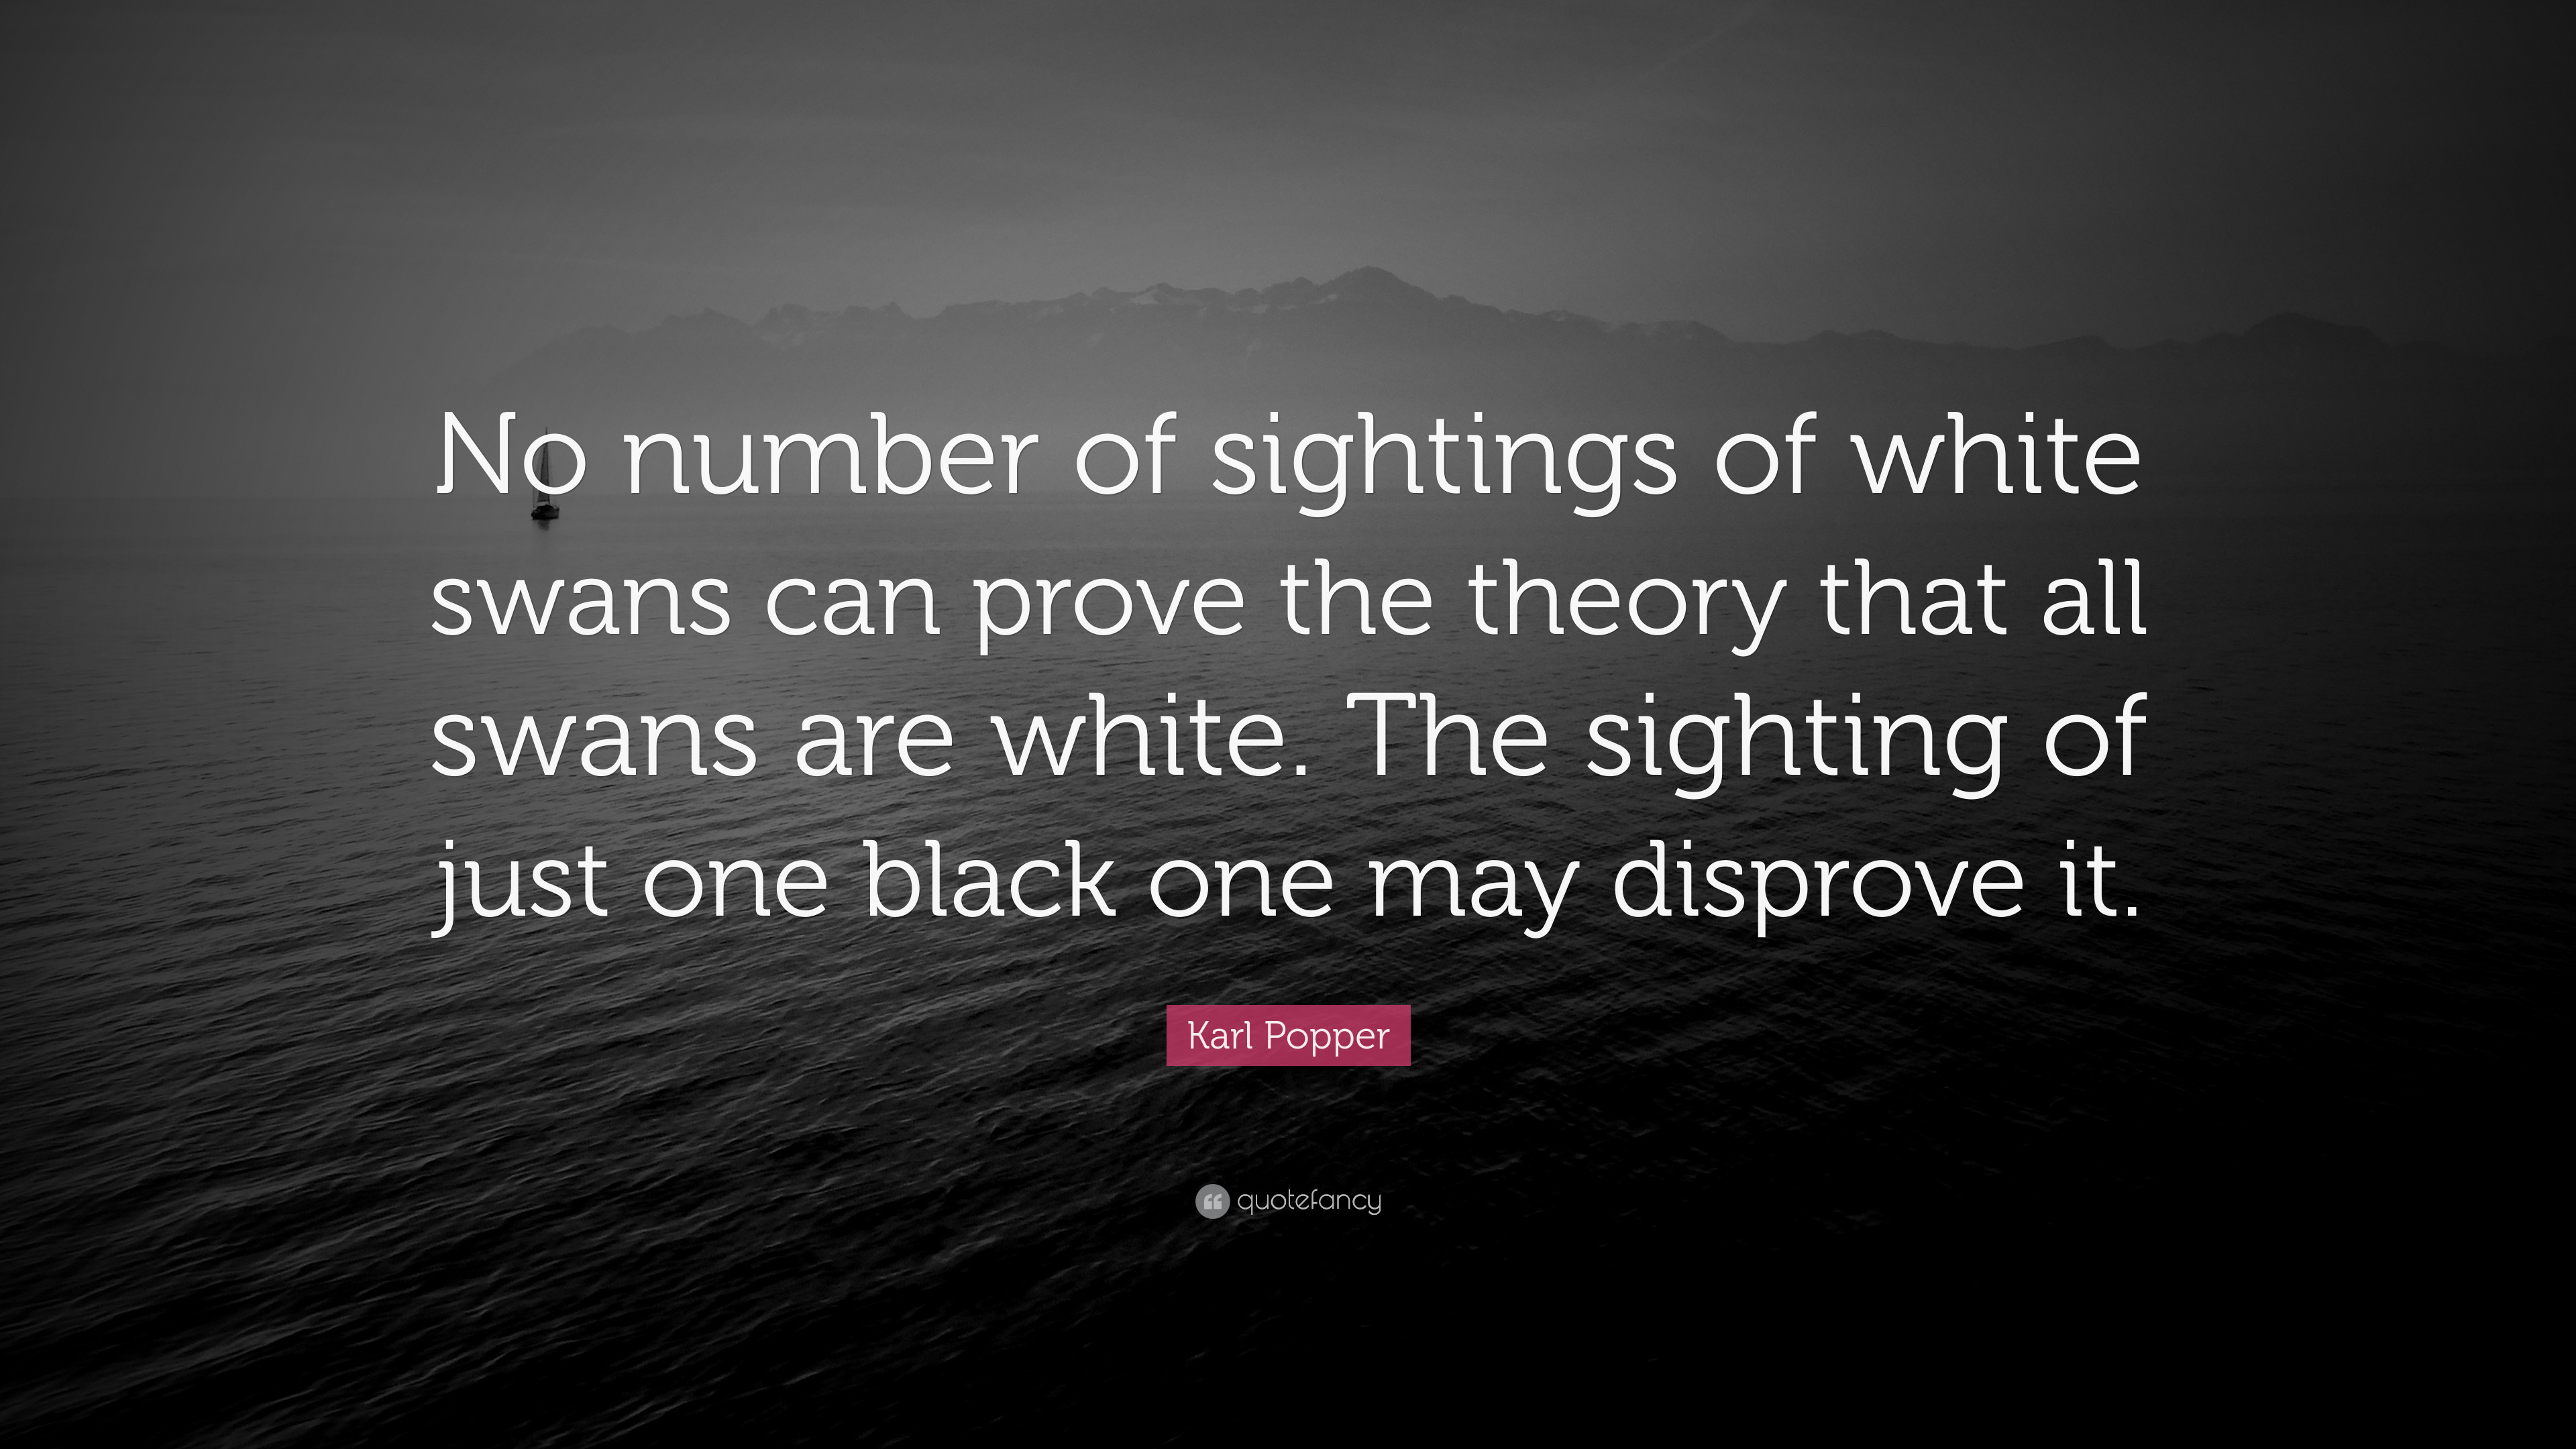 3840x2160 7 wallpapers. Karl Popper Quote: “No number of sightings of white swans can  prove the theory